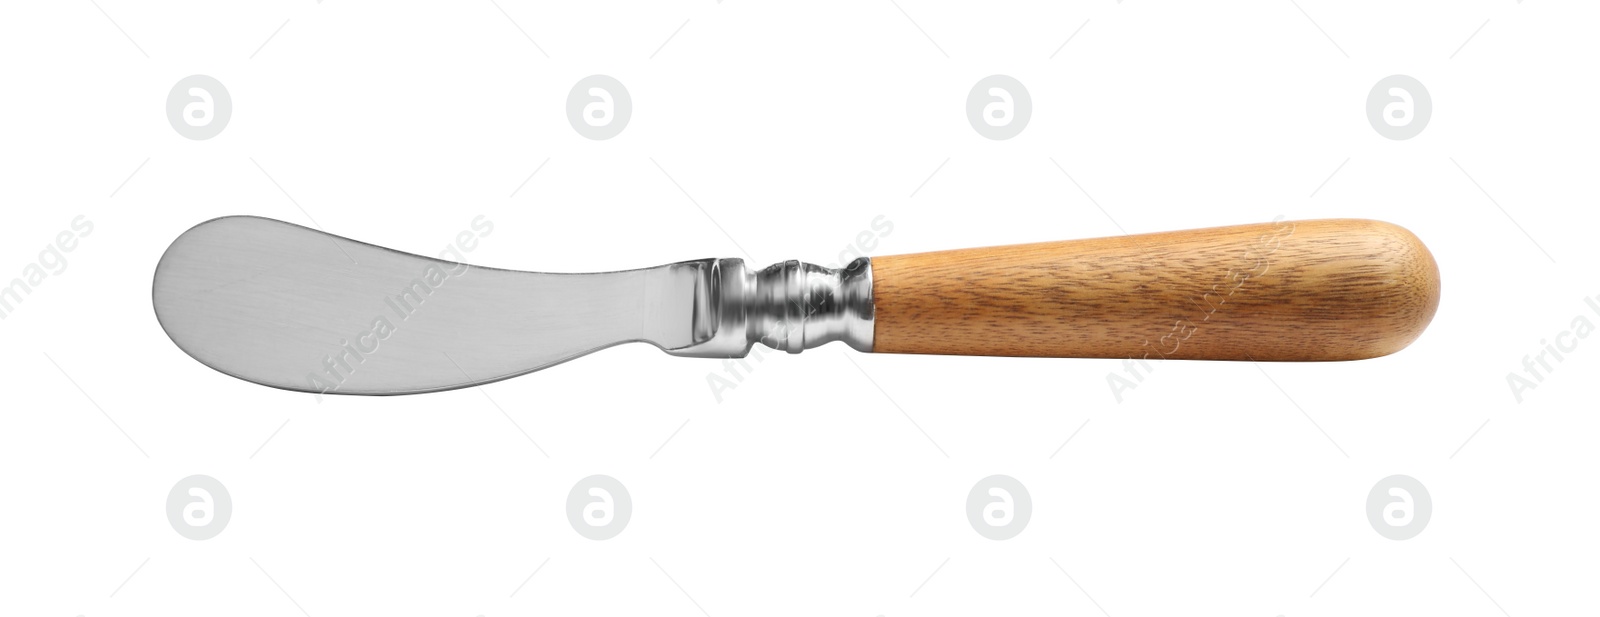 Photo of Soft cheese knife with wooden handle isolated on white